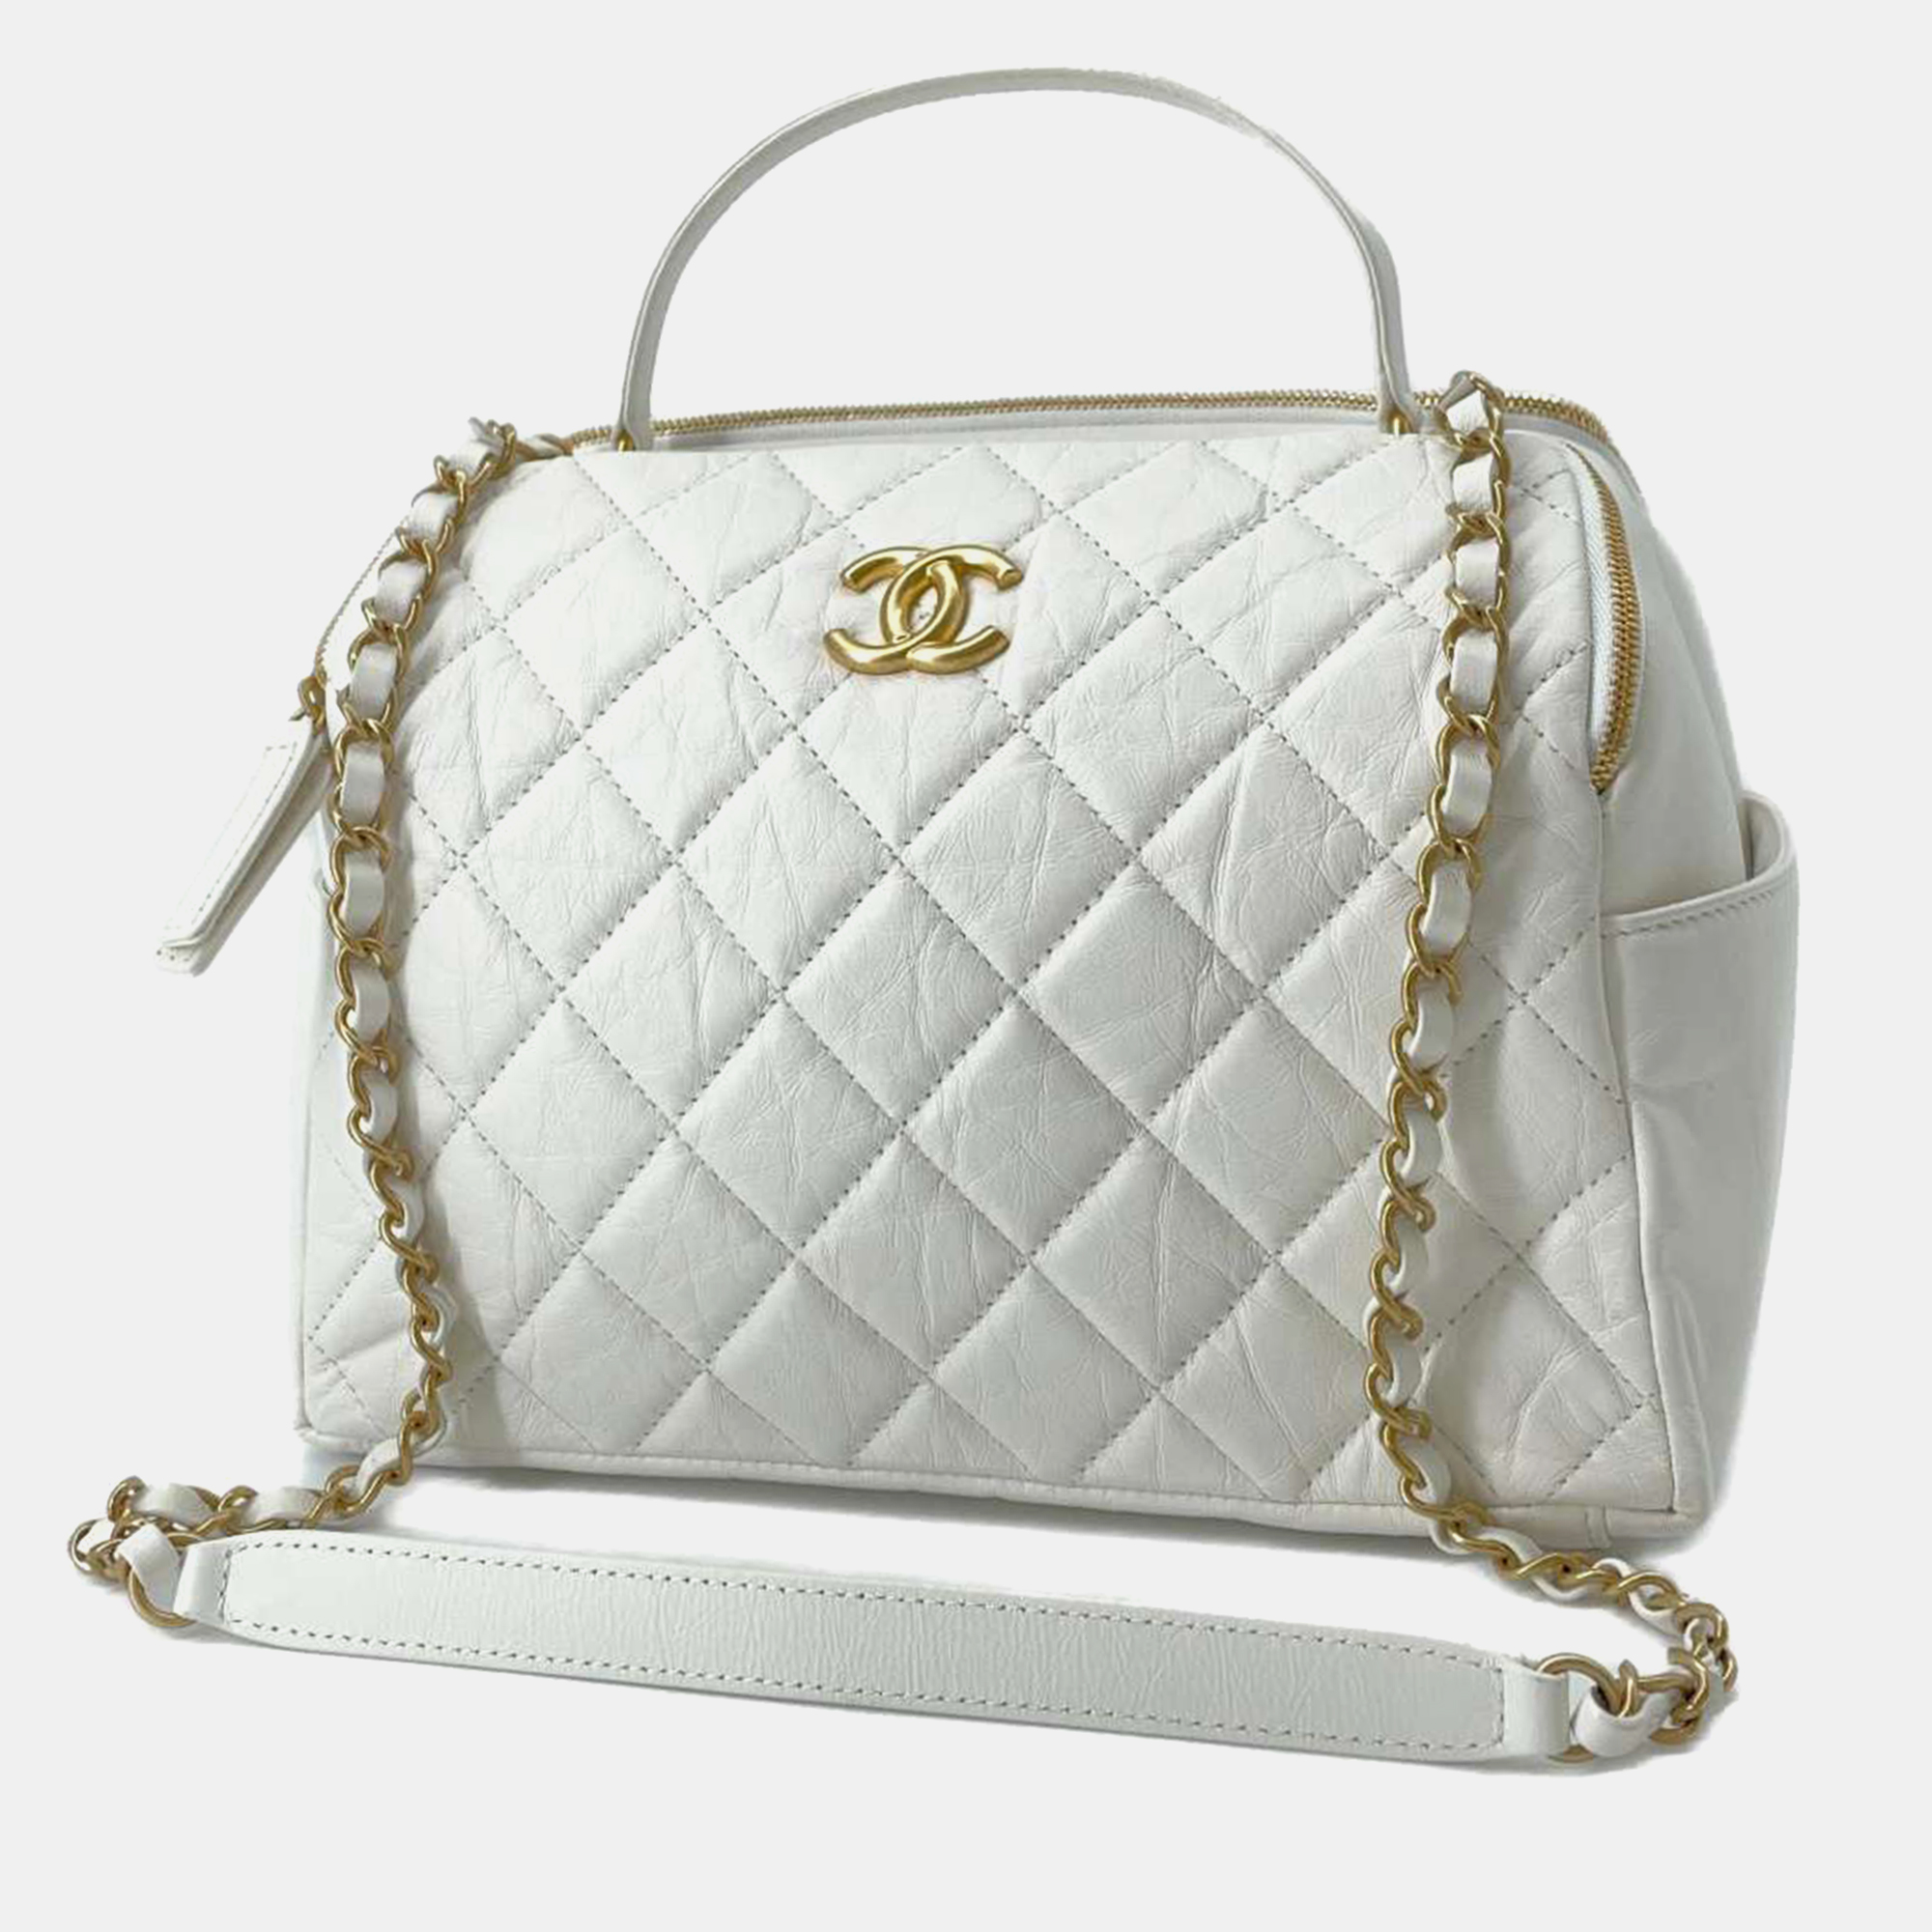 Uncompromising in quality and design this Chanel shoulder bag is a must have in any wardrobe. With its durable construction and luxurious finish its the perfect accessory for any occasion.